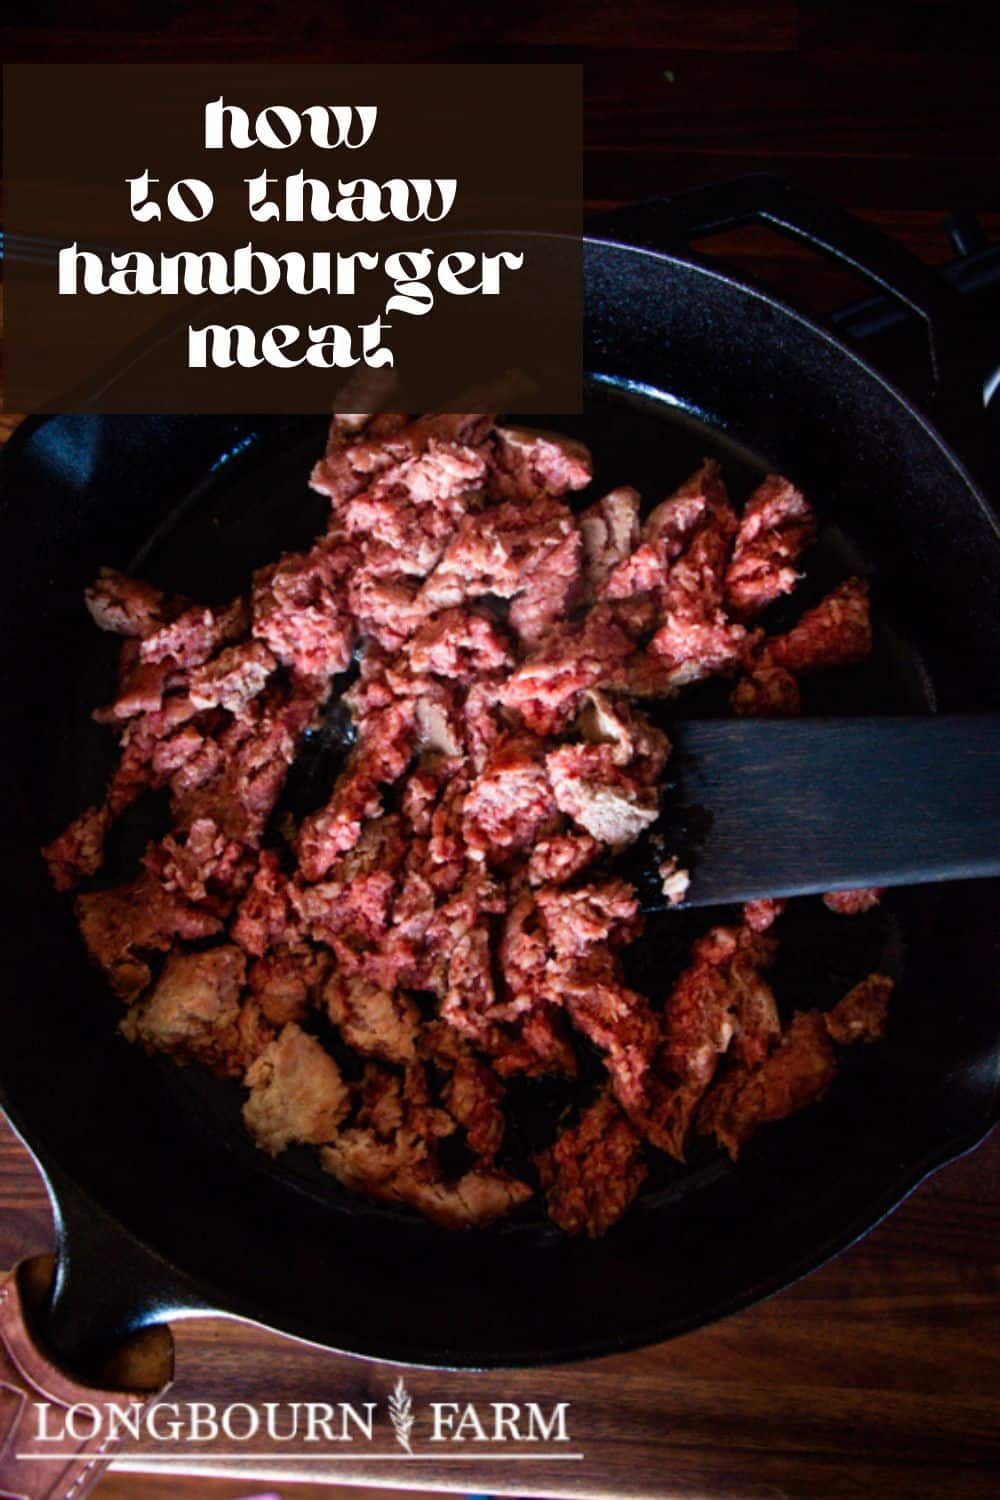 Hamburger meat is a versatile and convenient ingredient that can be used in many dishes. For example, it can make burgers, tacos, meatballs, and so much more! This means it is an excellent ingredient to have in the freezer for quick and easy meal solutions. But before you can start cooking, your hamburger meat needs to be properly thawed.